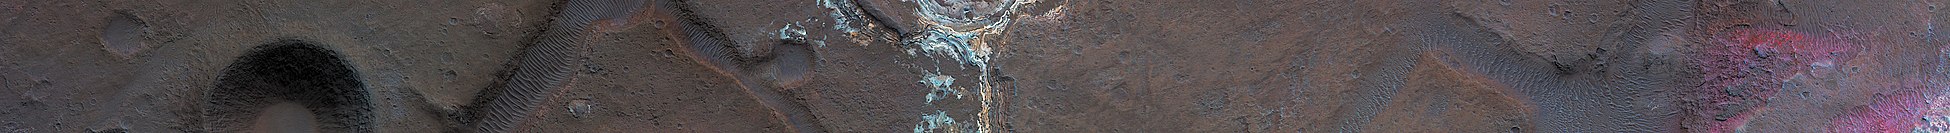 ESP 023383 1590 Light-Toned Layered Rock Outcrop in Ladon Valles.jpg